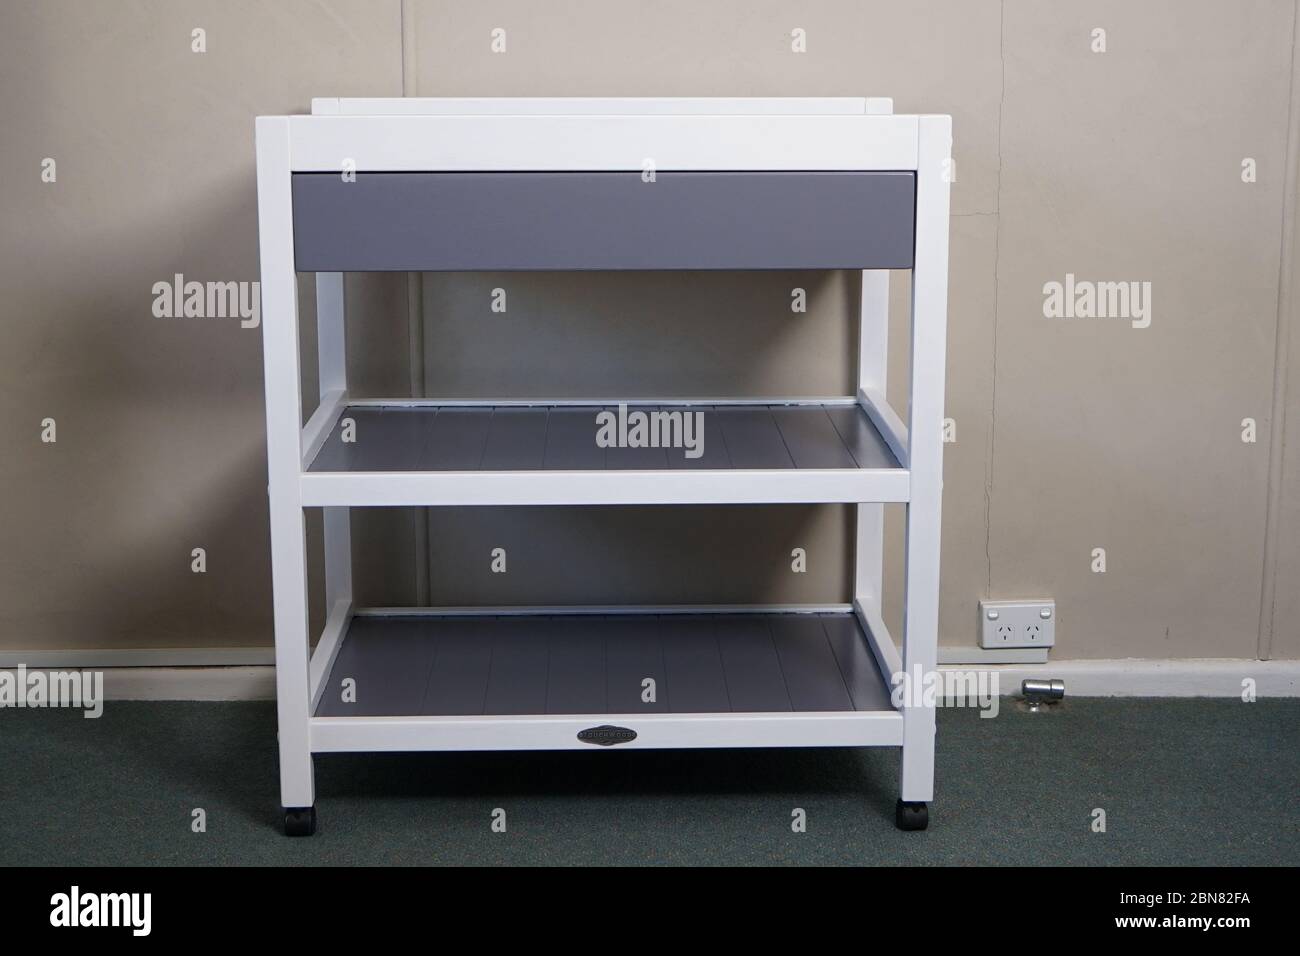 STANWELL TOPS, AUSTRALIA - Nov 10, 2019: Restored and painted baby change table Stock Photo